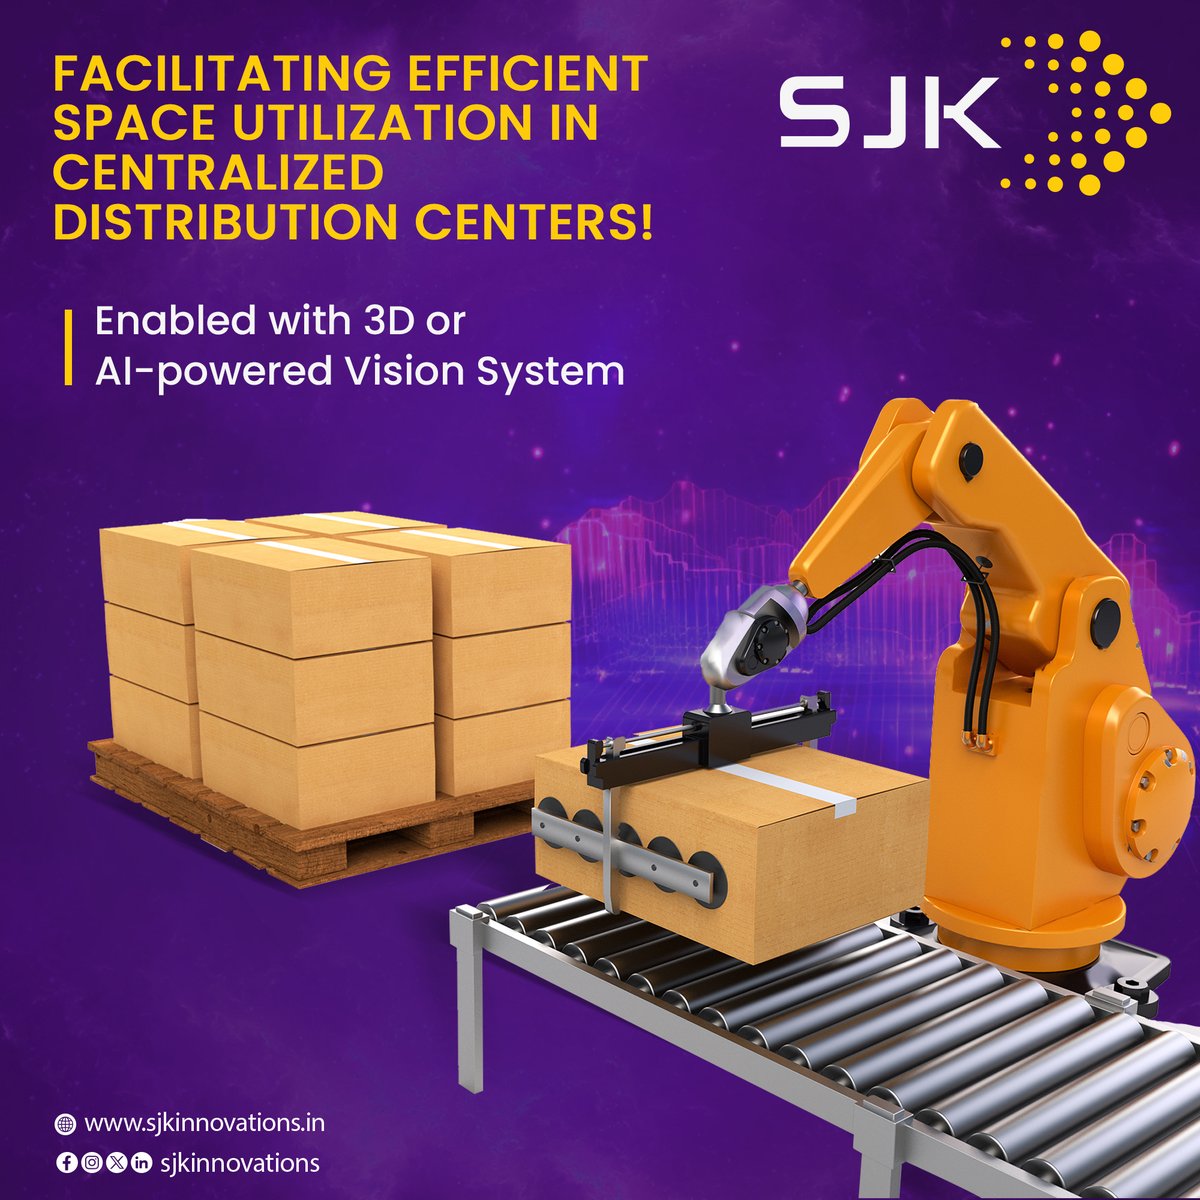 Robotic palletizers are adept in enhancing warehouse operations by sorting, transferring, and stacking cases of goods or products onto a pallet at the end of a manufacturing line. 
.
.
.
#palletizer #warehouse #sjk #warehouseoperative #warehousing #warehouseautomation